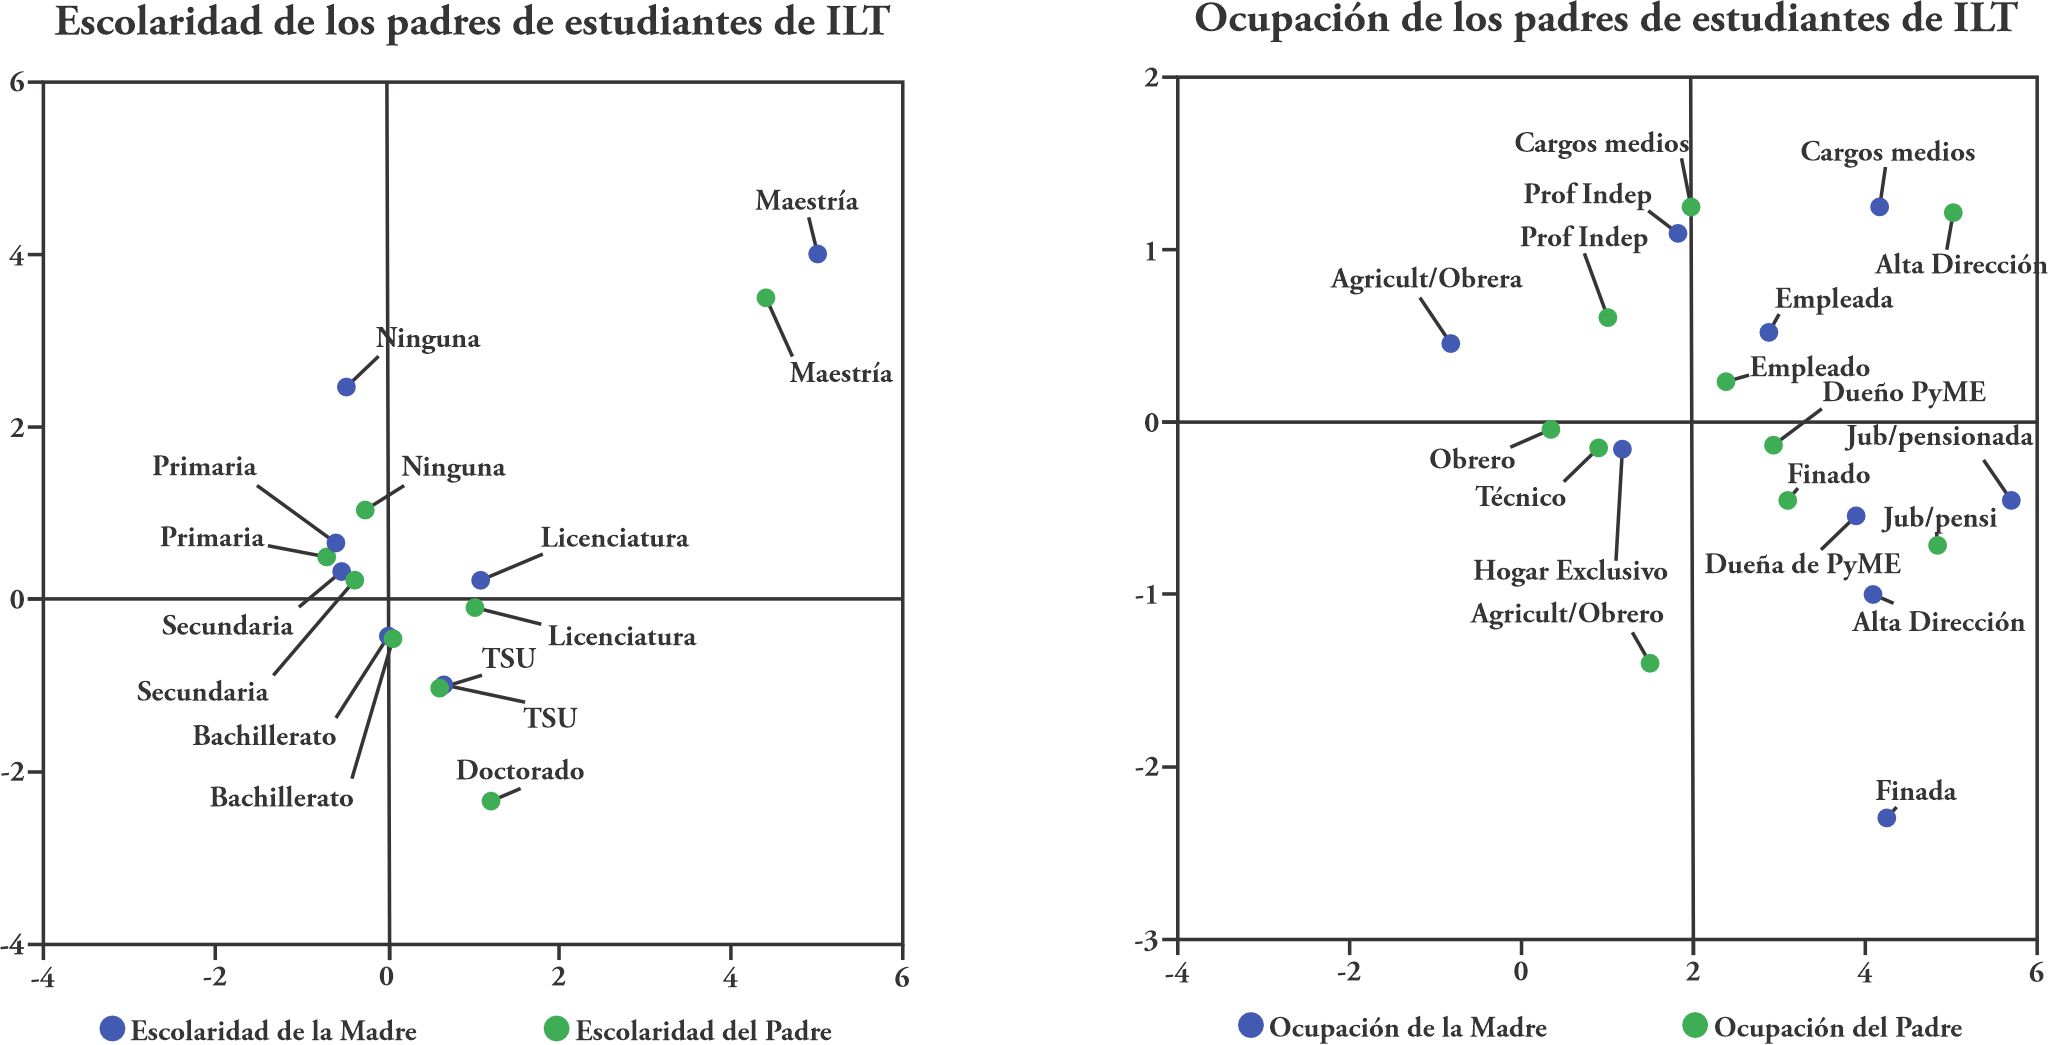 Perception
plots of the relationship between parental schooling and occupation